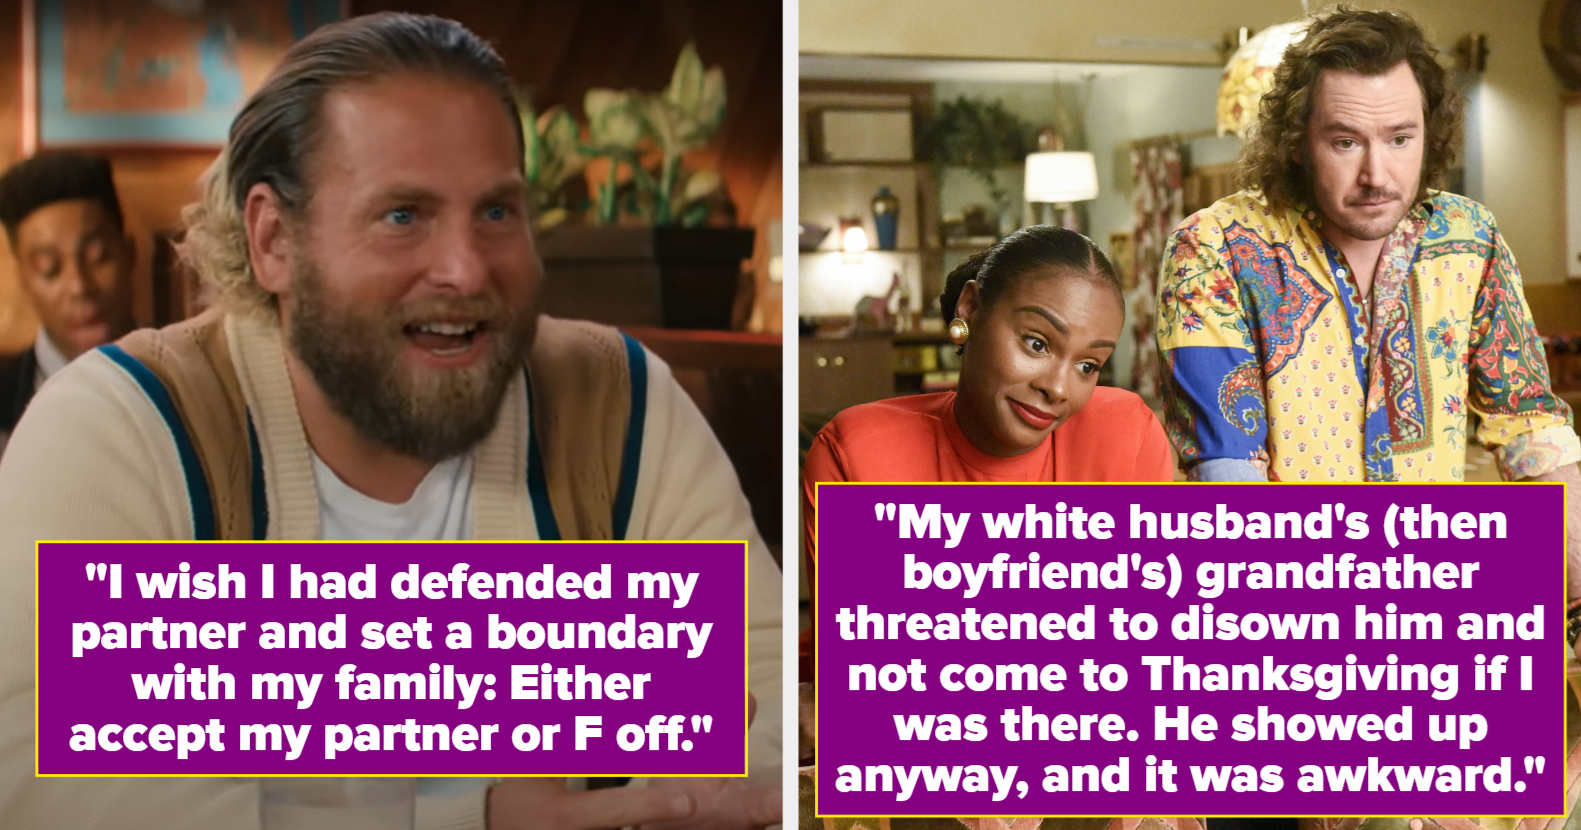 Interracial Couples Open Up On How Their Families Reacted To Their Partners pic